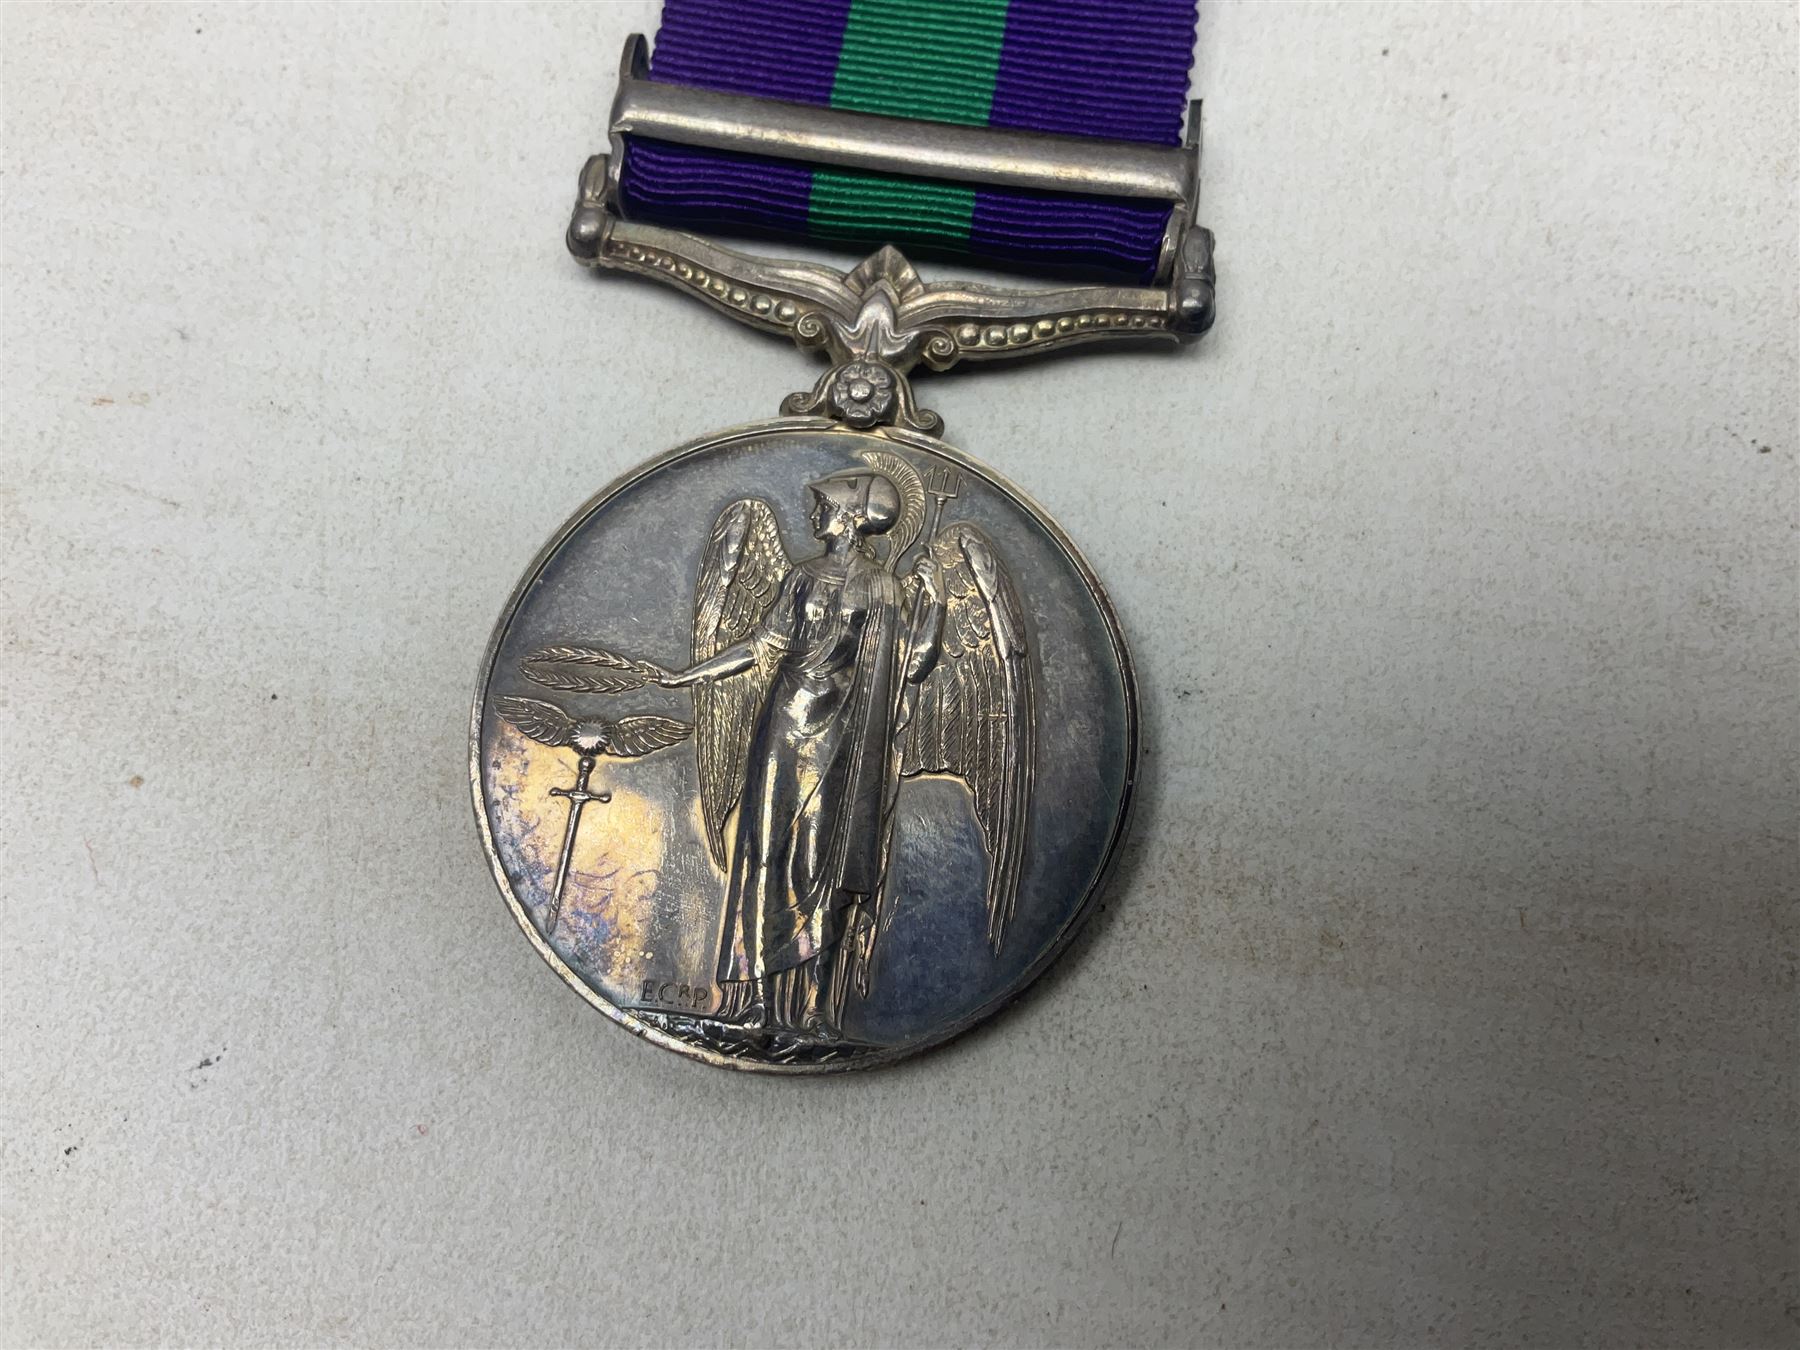 George VI General Service Medal with Palestine 1945-48 clasp awarded to 19117460 Pte. P. Tilmouth R. - Image 5 of 8